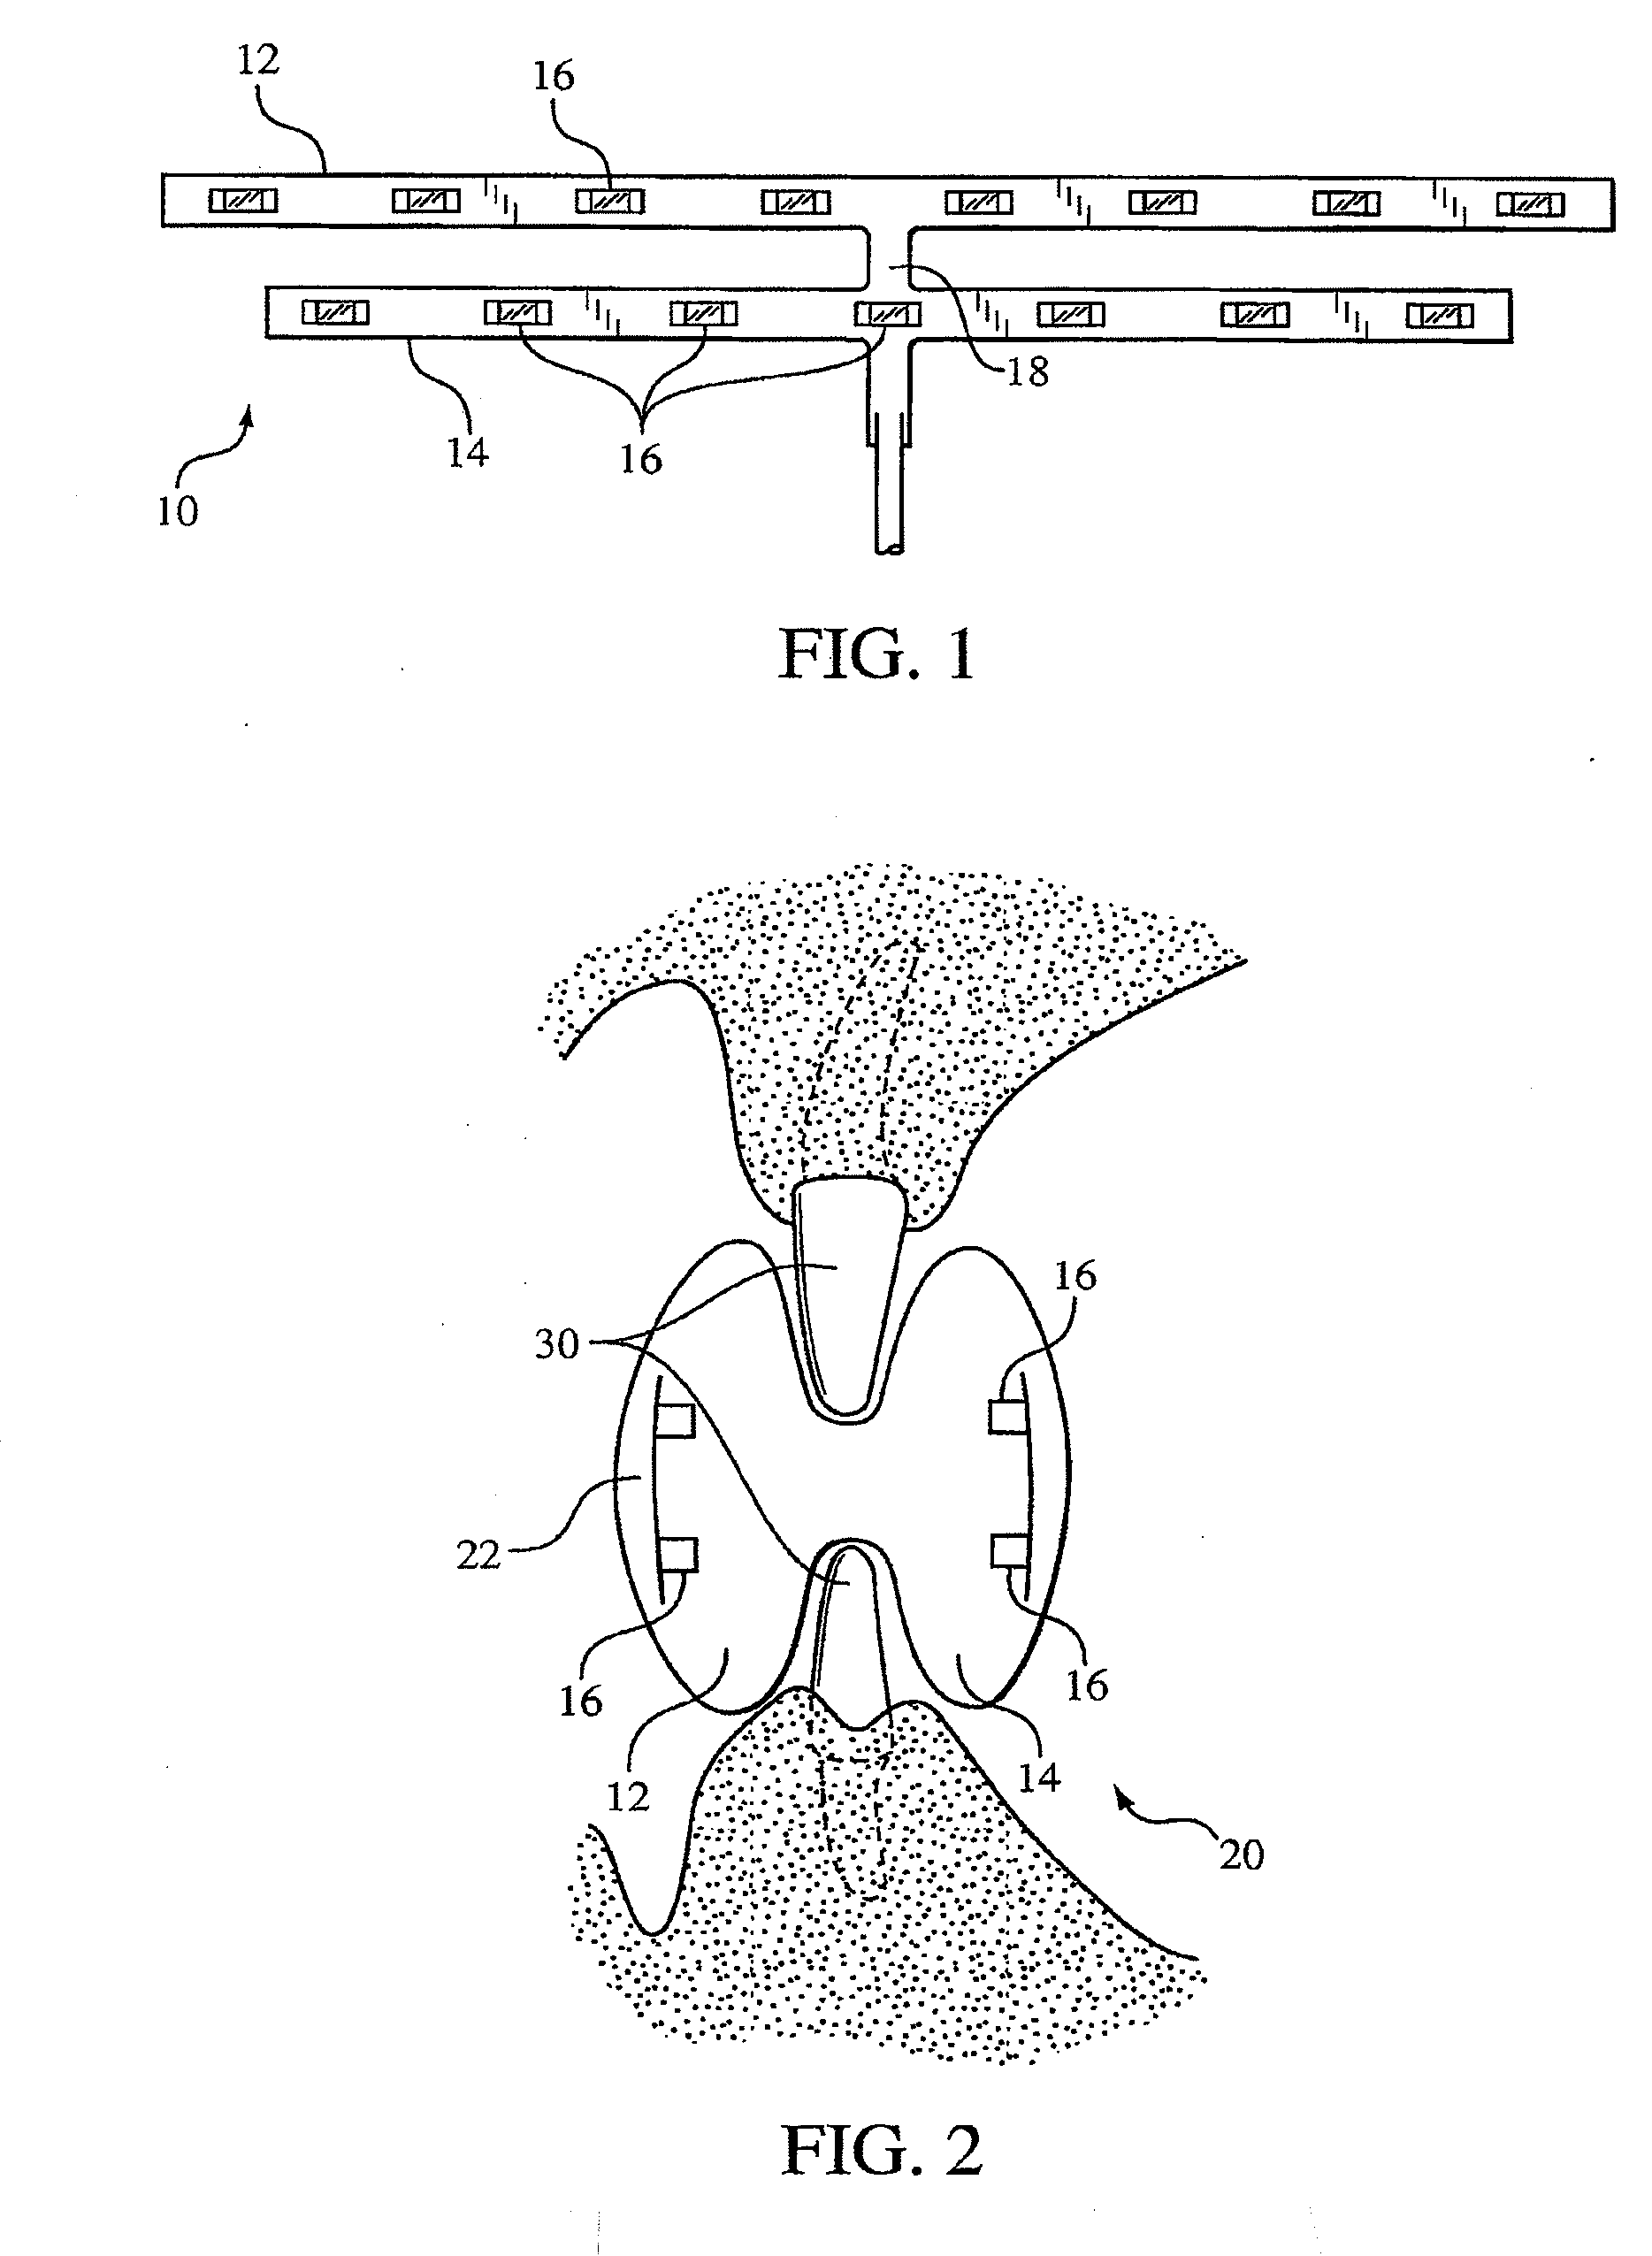 Methods for effecting oral treatment of teeth or gums